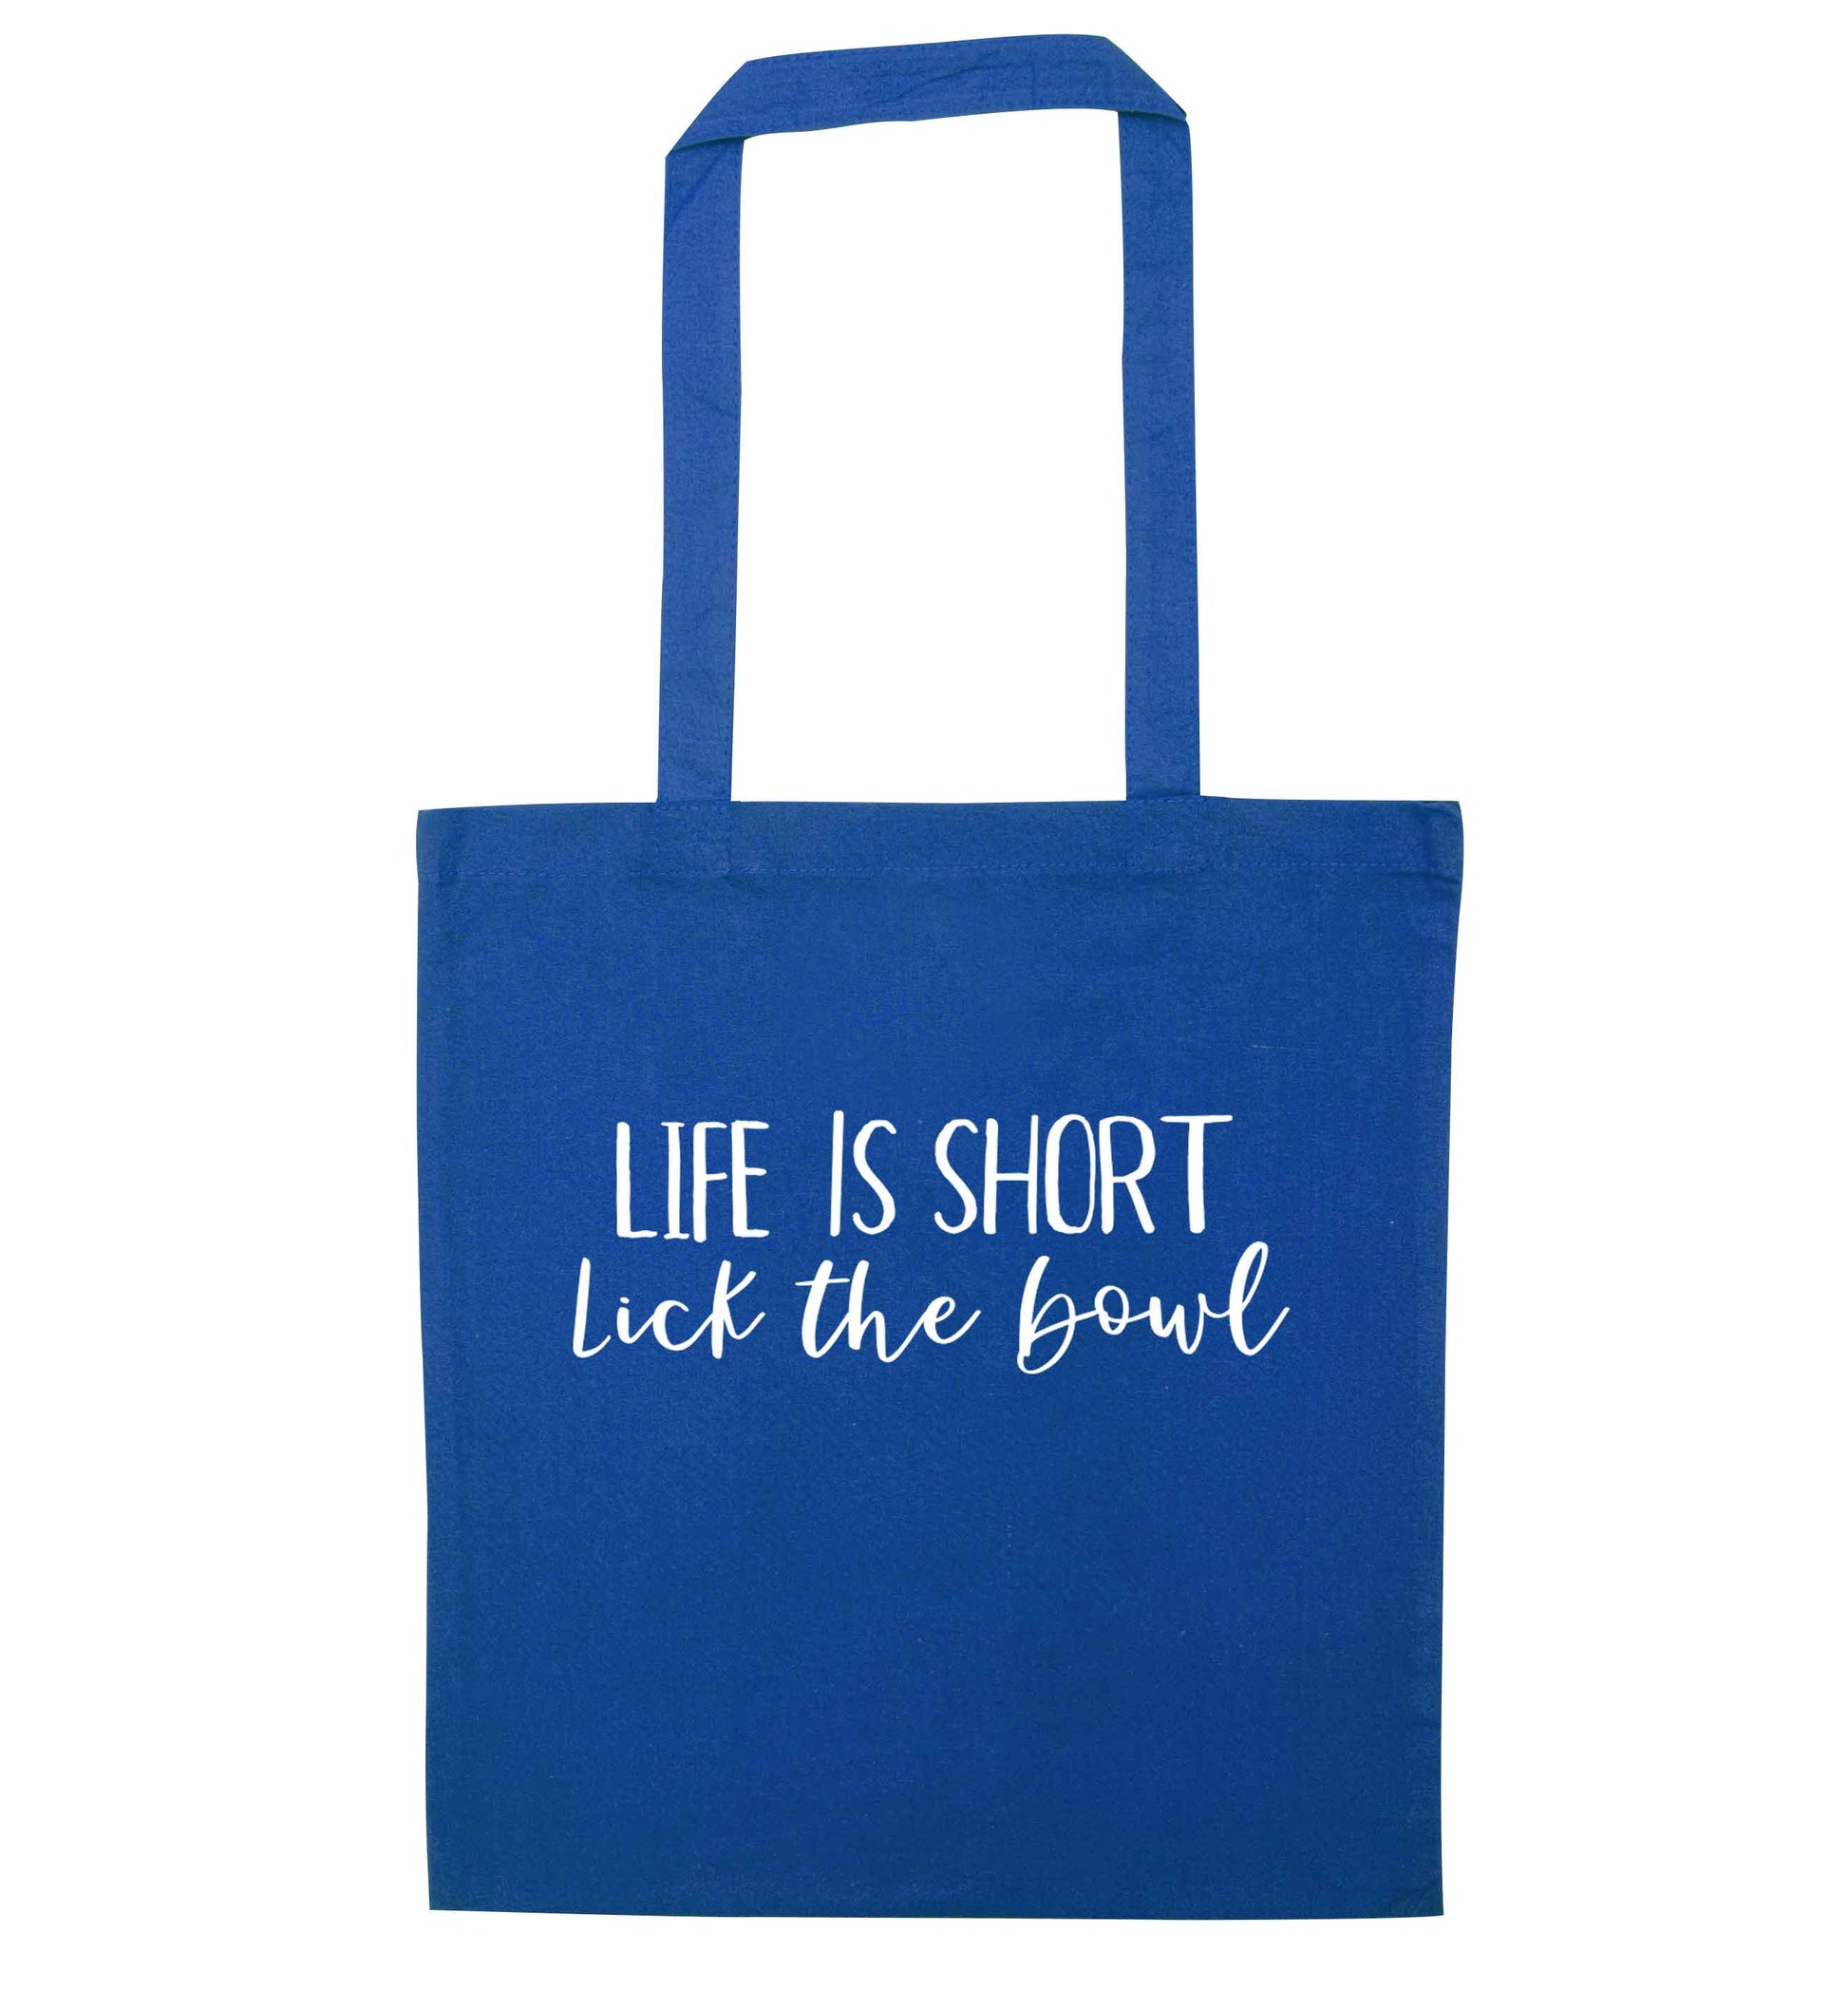 Life is short lick the bowl blue tote bag